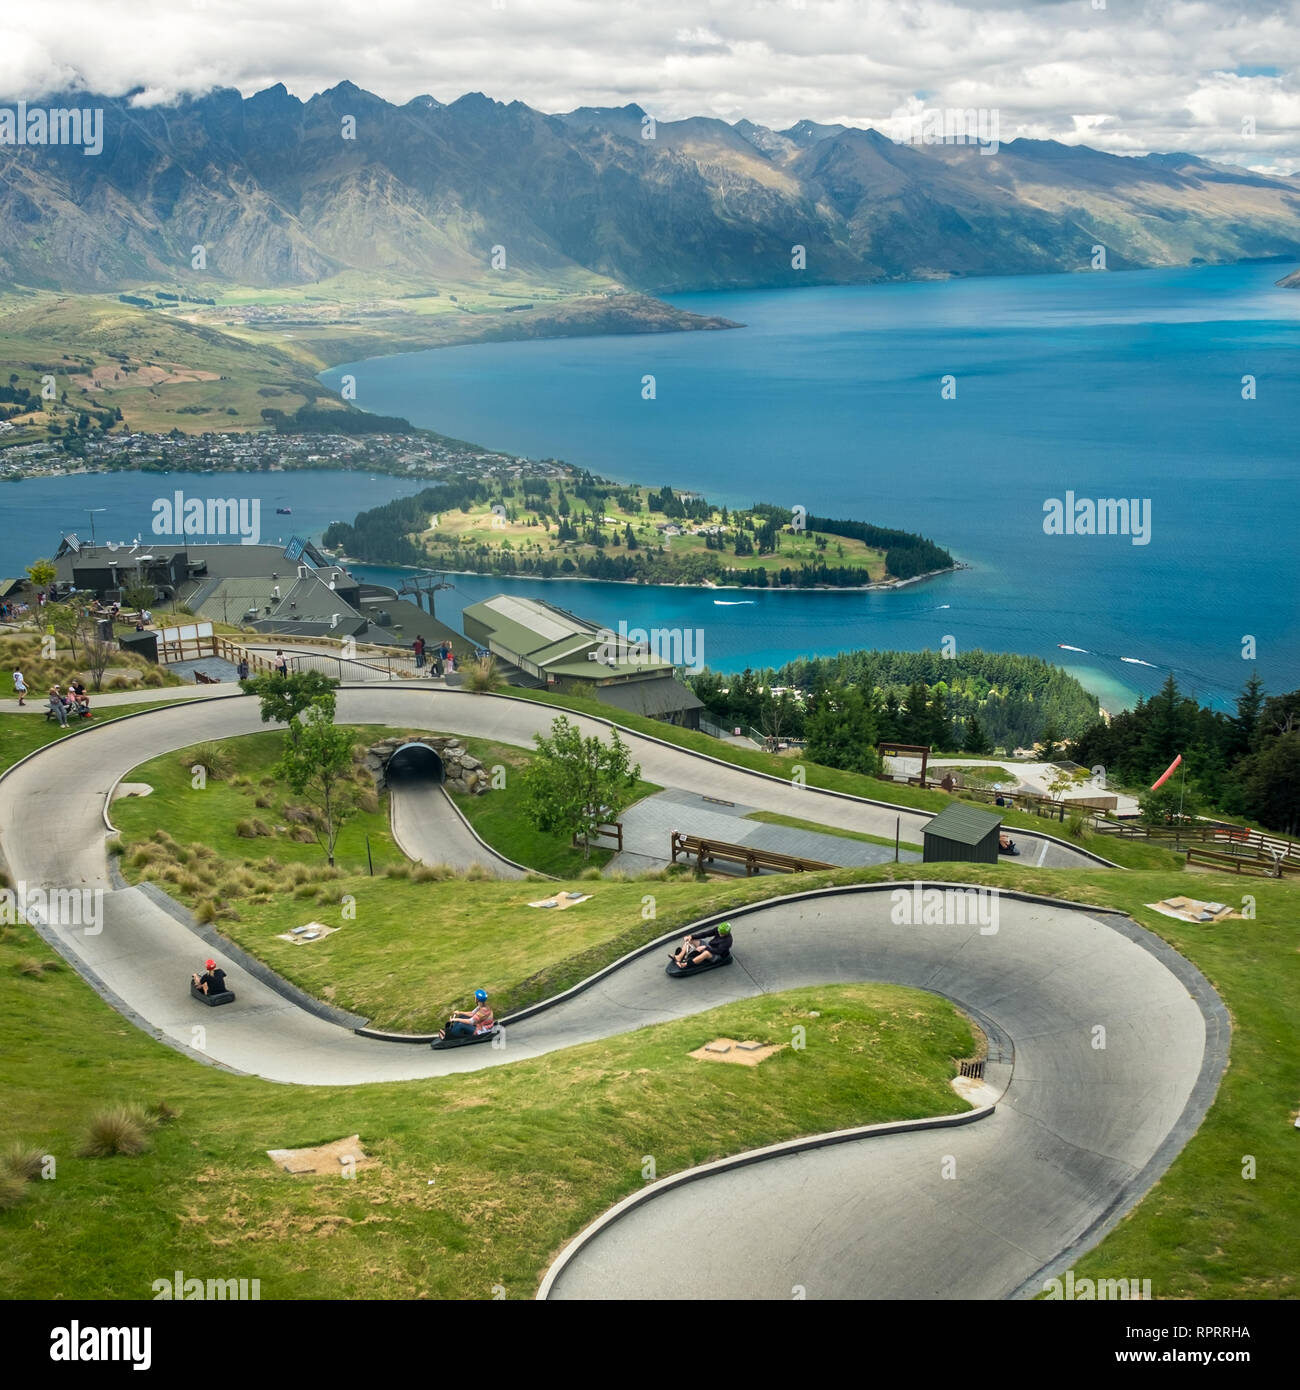 Luge track with mountains in the background at Queenstown Skyline site, New Zealand. Stock Photo